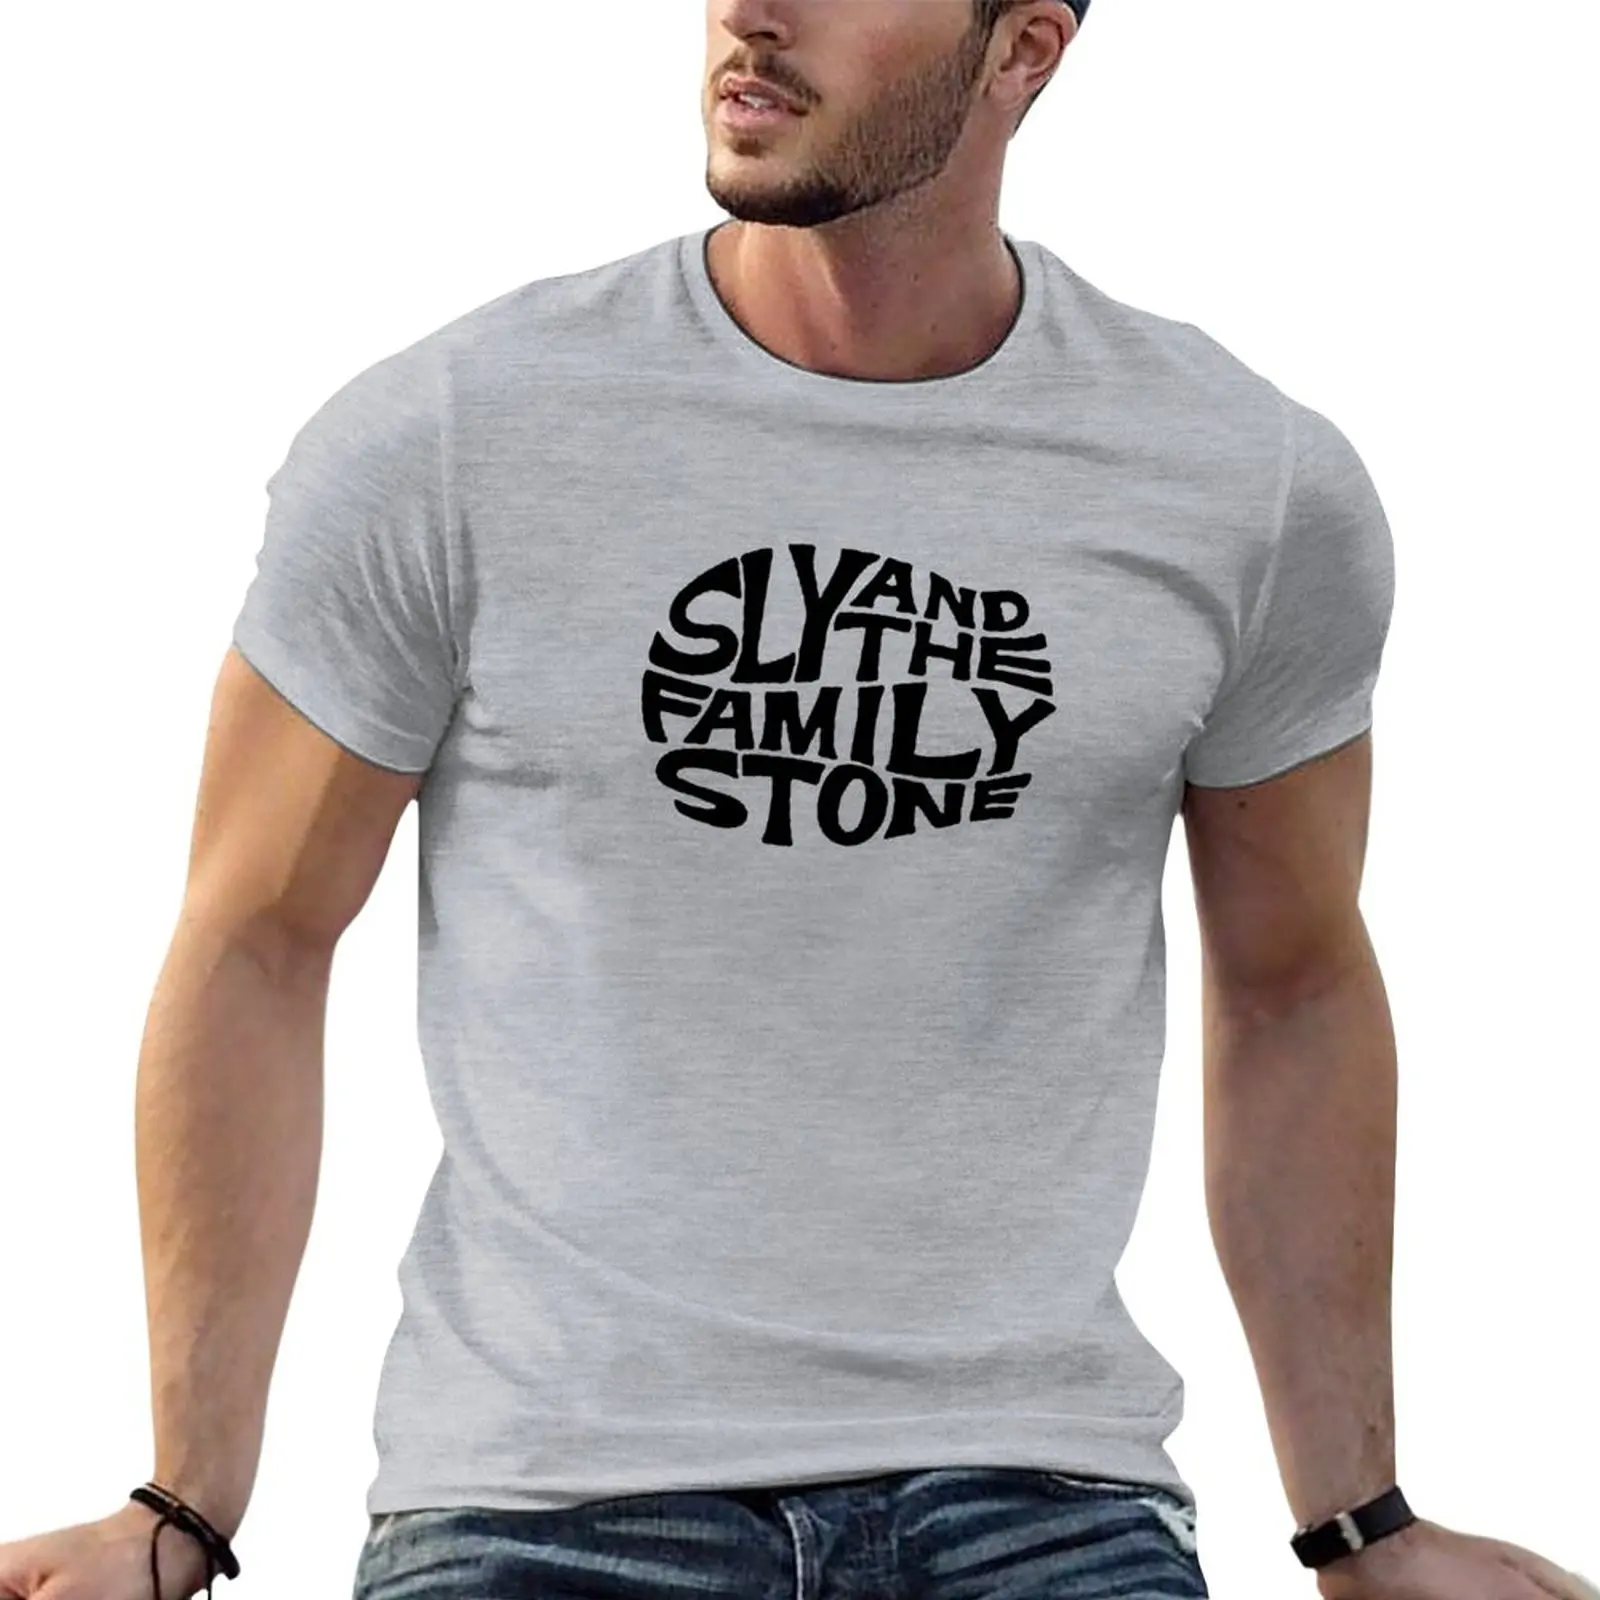 New Sly and the Family Stone T-Shirt summer tops cute tops shirts graphic tees black t-shirts for men new sly and the family stone t shirt summer tops cute tops shirts graphic tees black t shirts for men